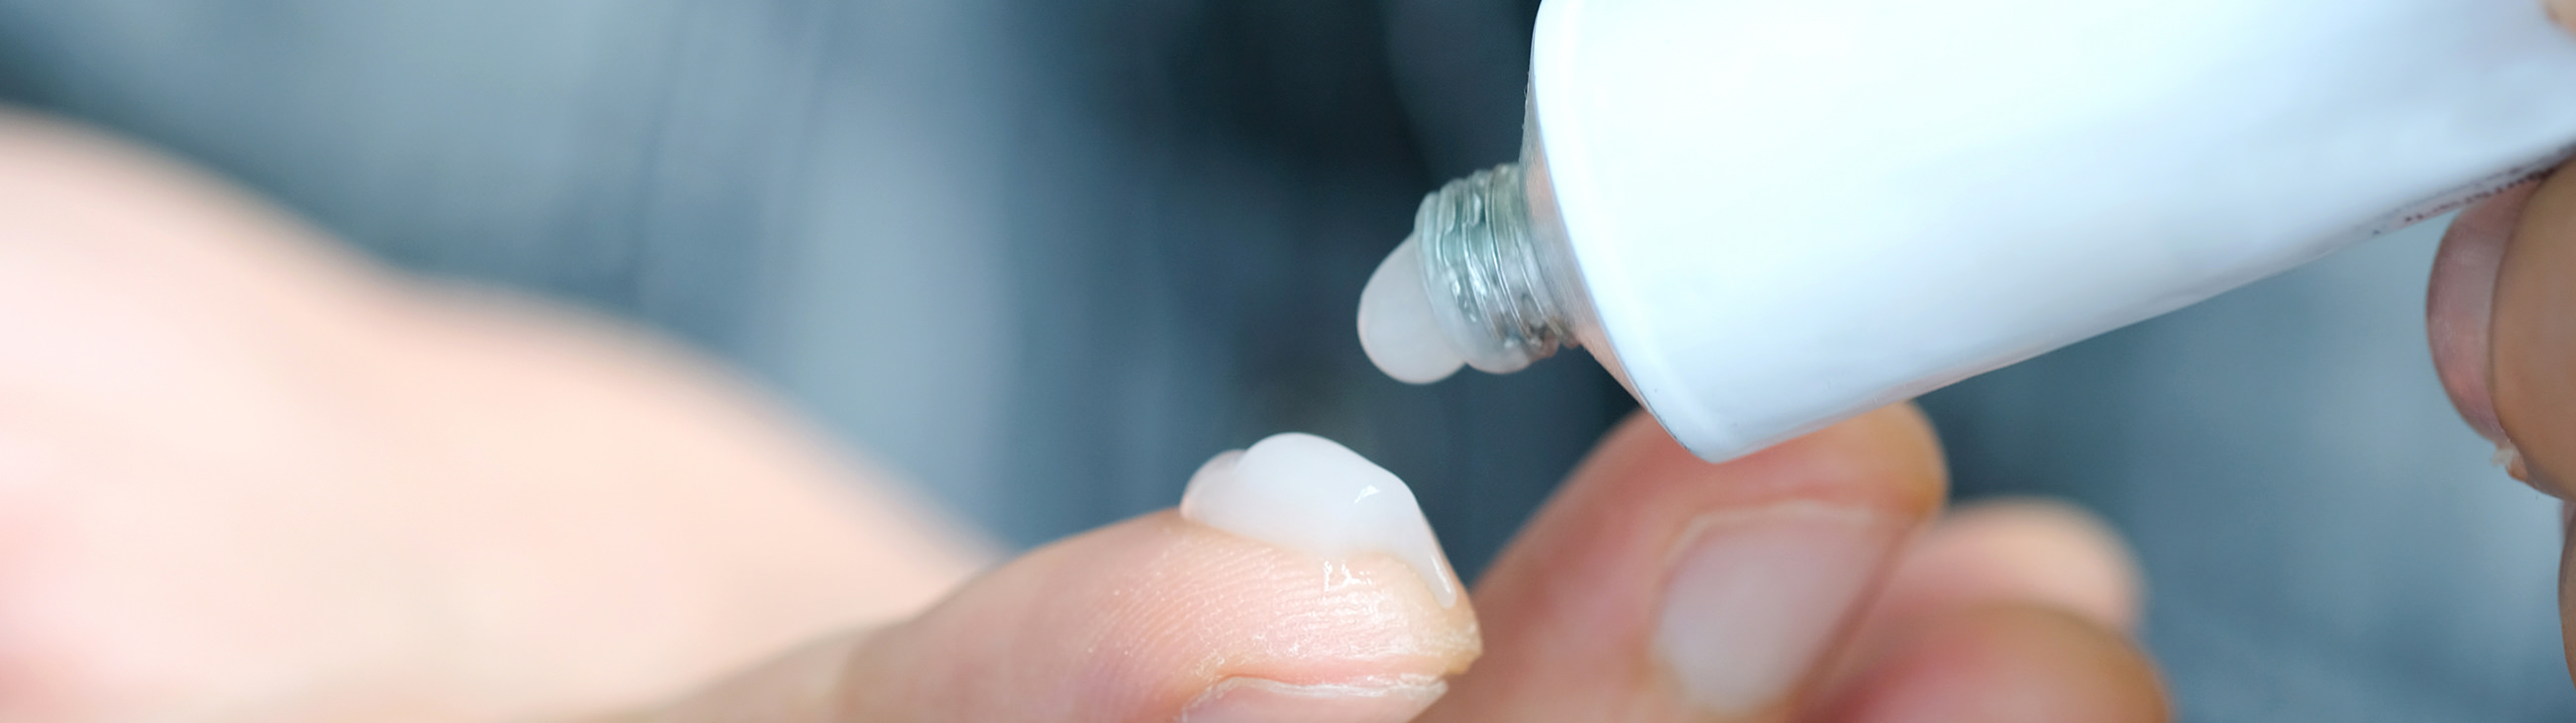 How to apply your cortisone cream for eczema